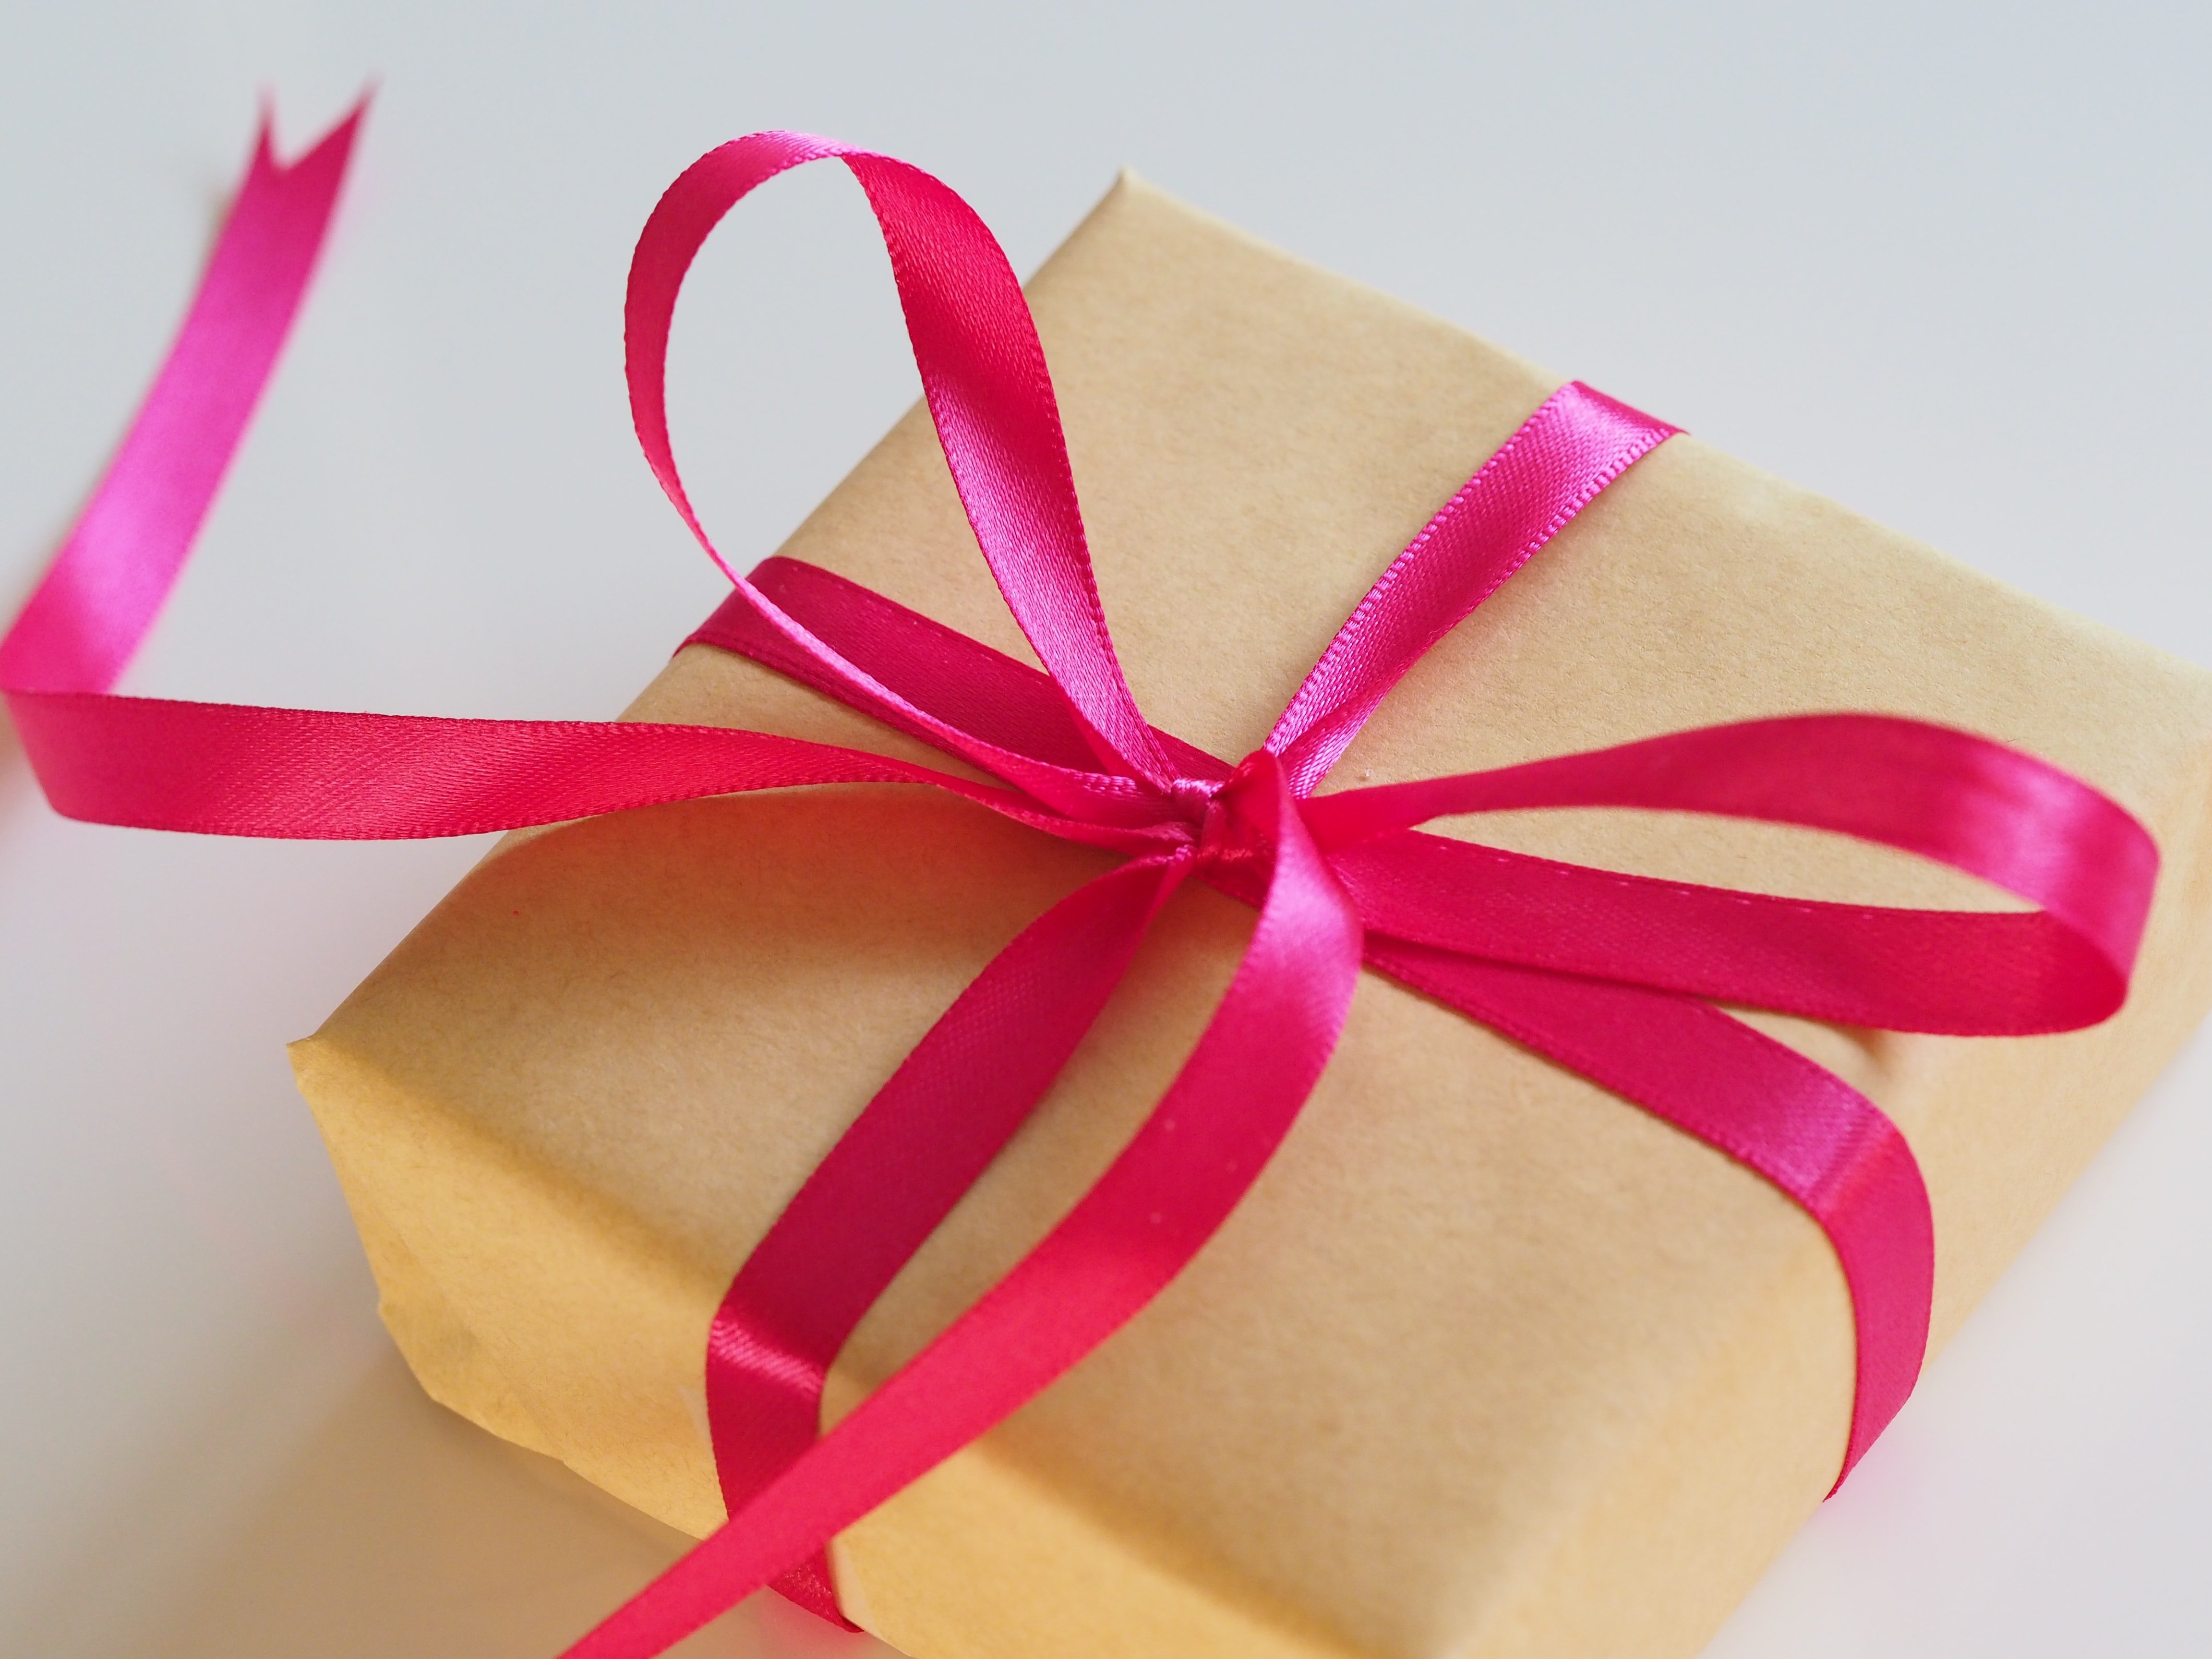 Brown gift box with a red ribbon | Source: Unplash